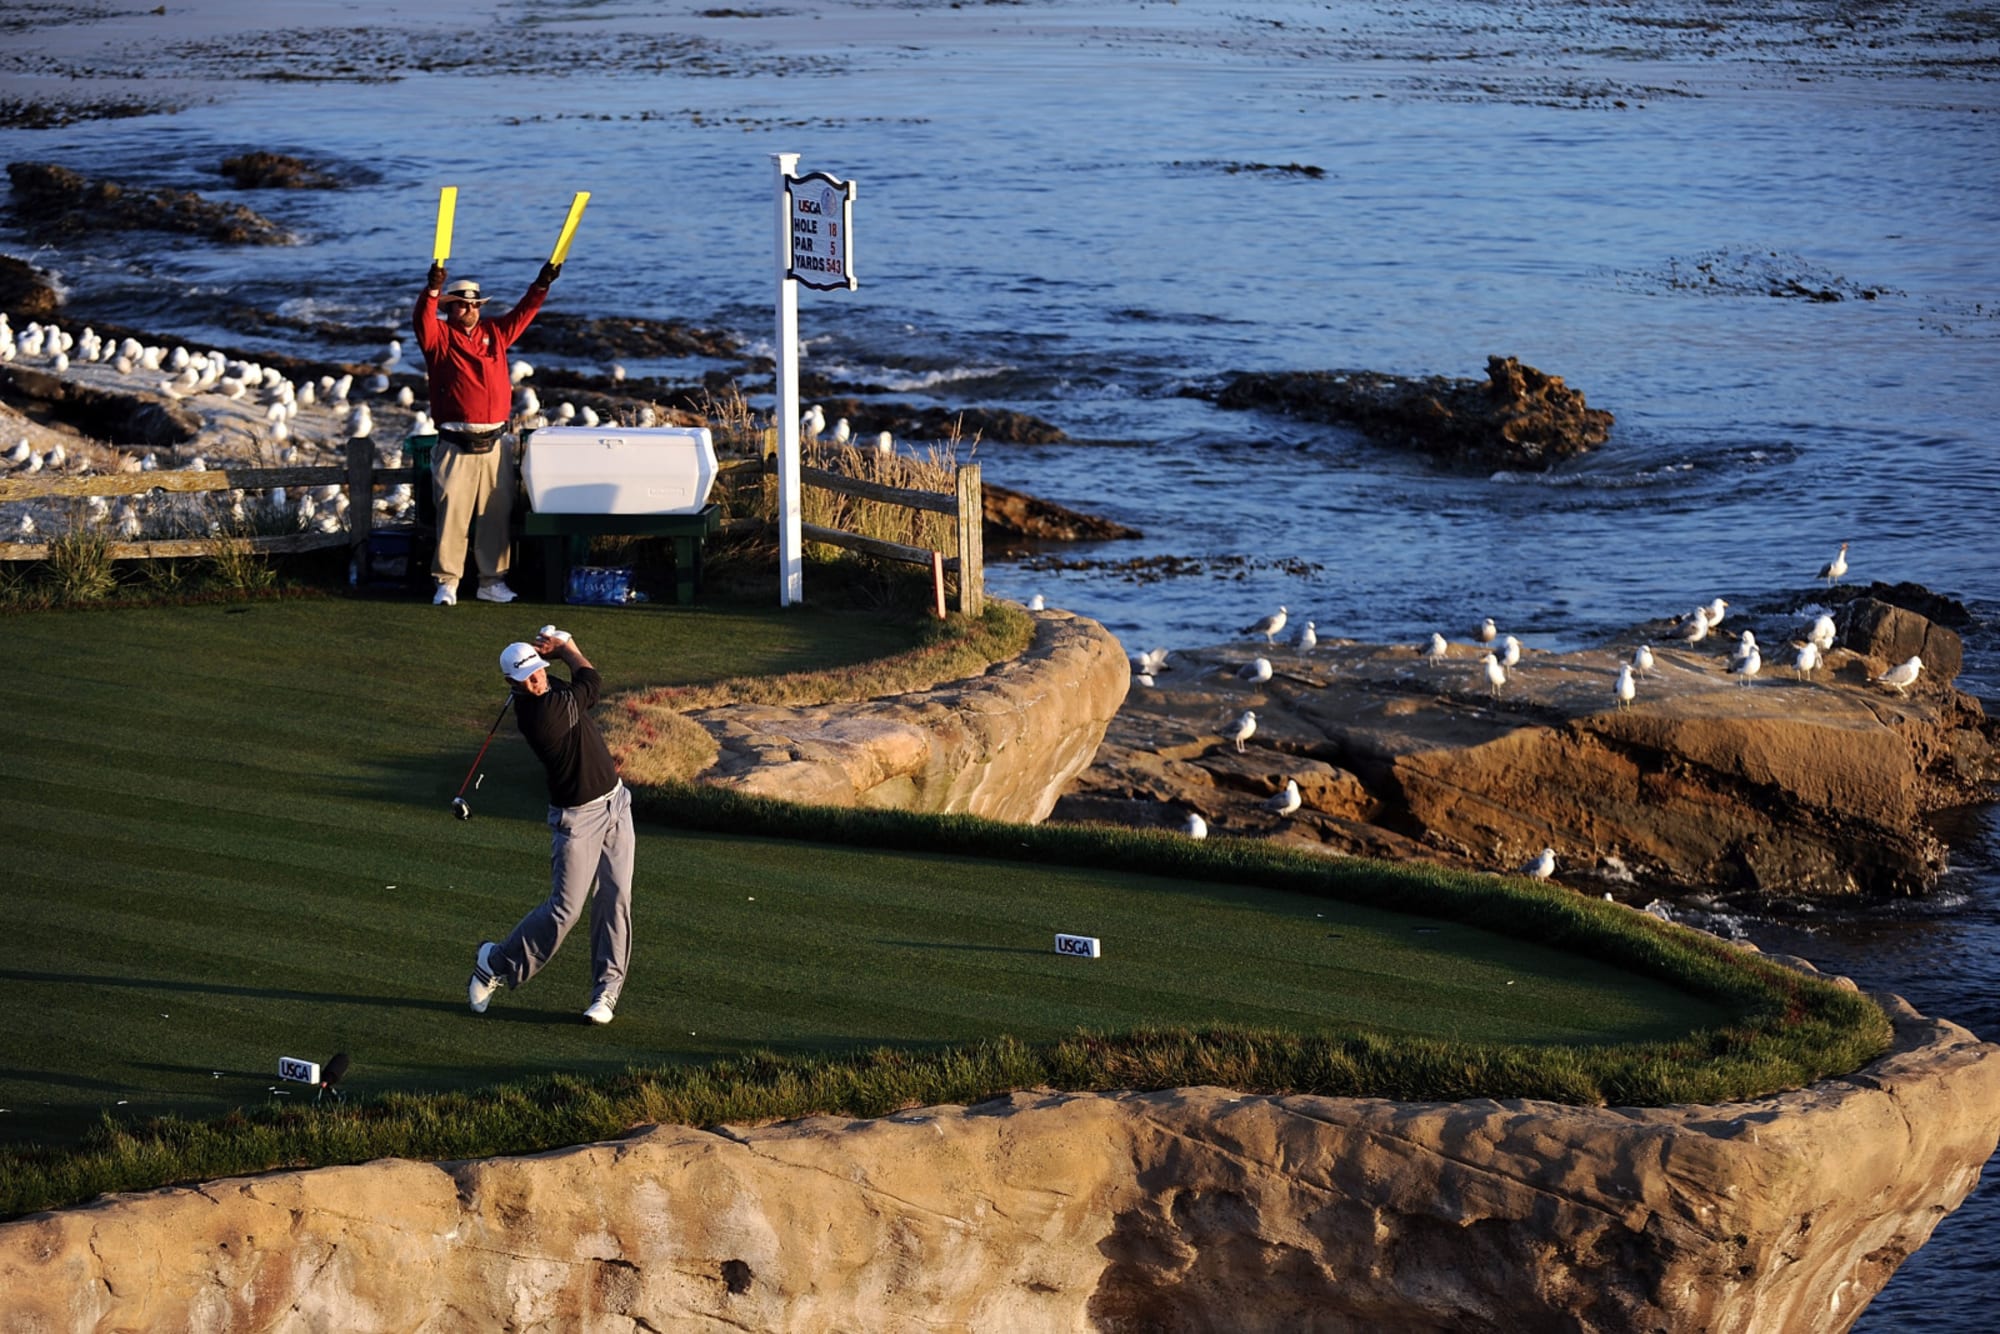 U.S. Open 2019 Pebble Beach is the proving ground of the greats